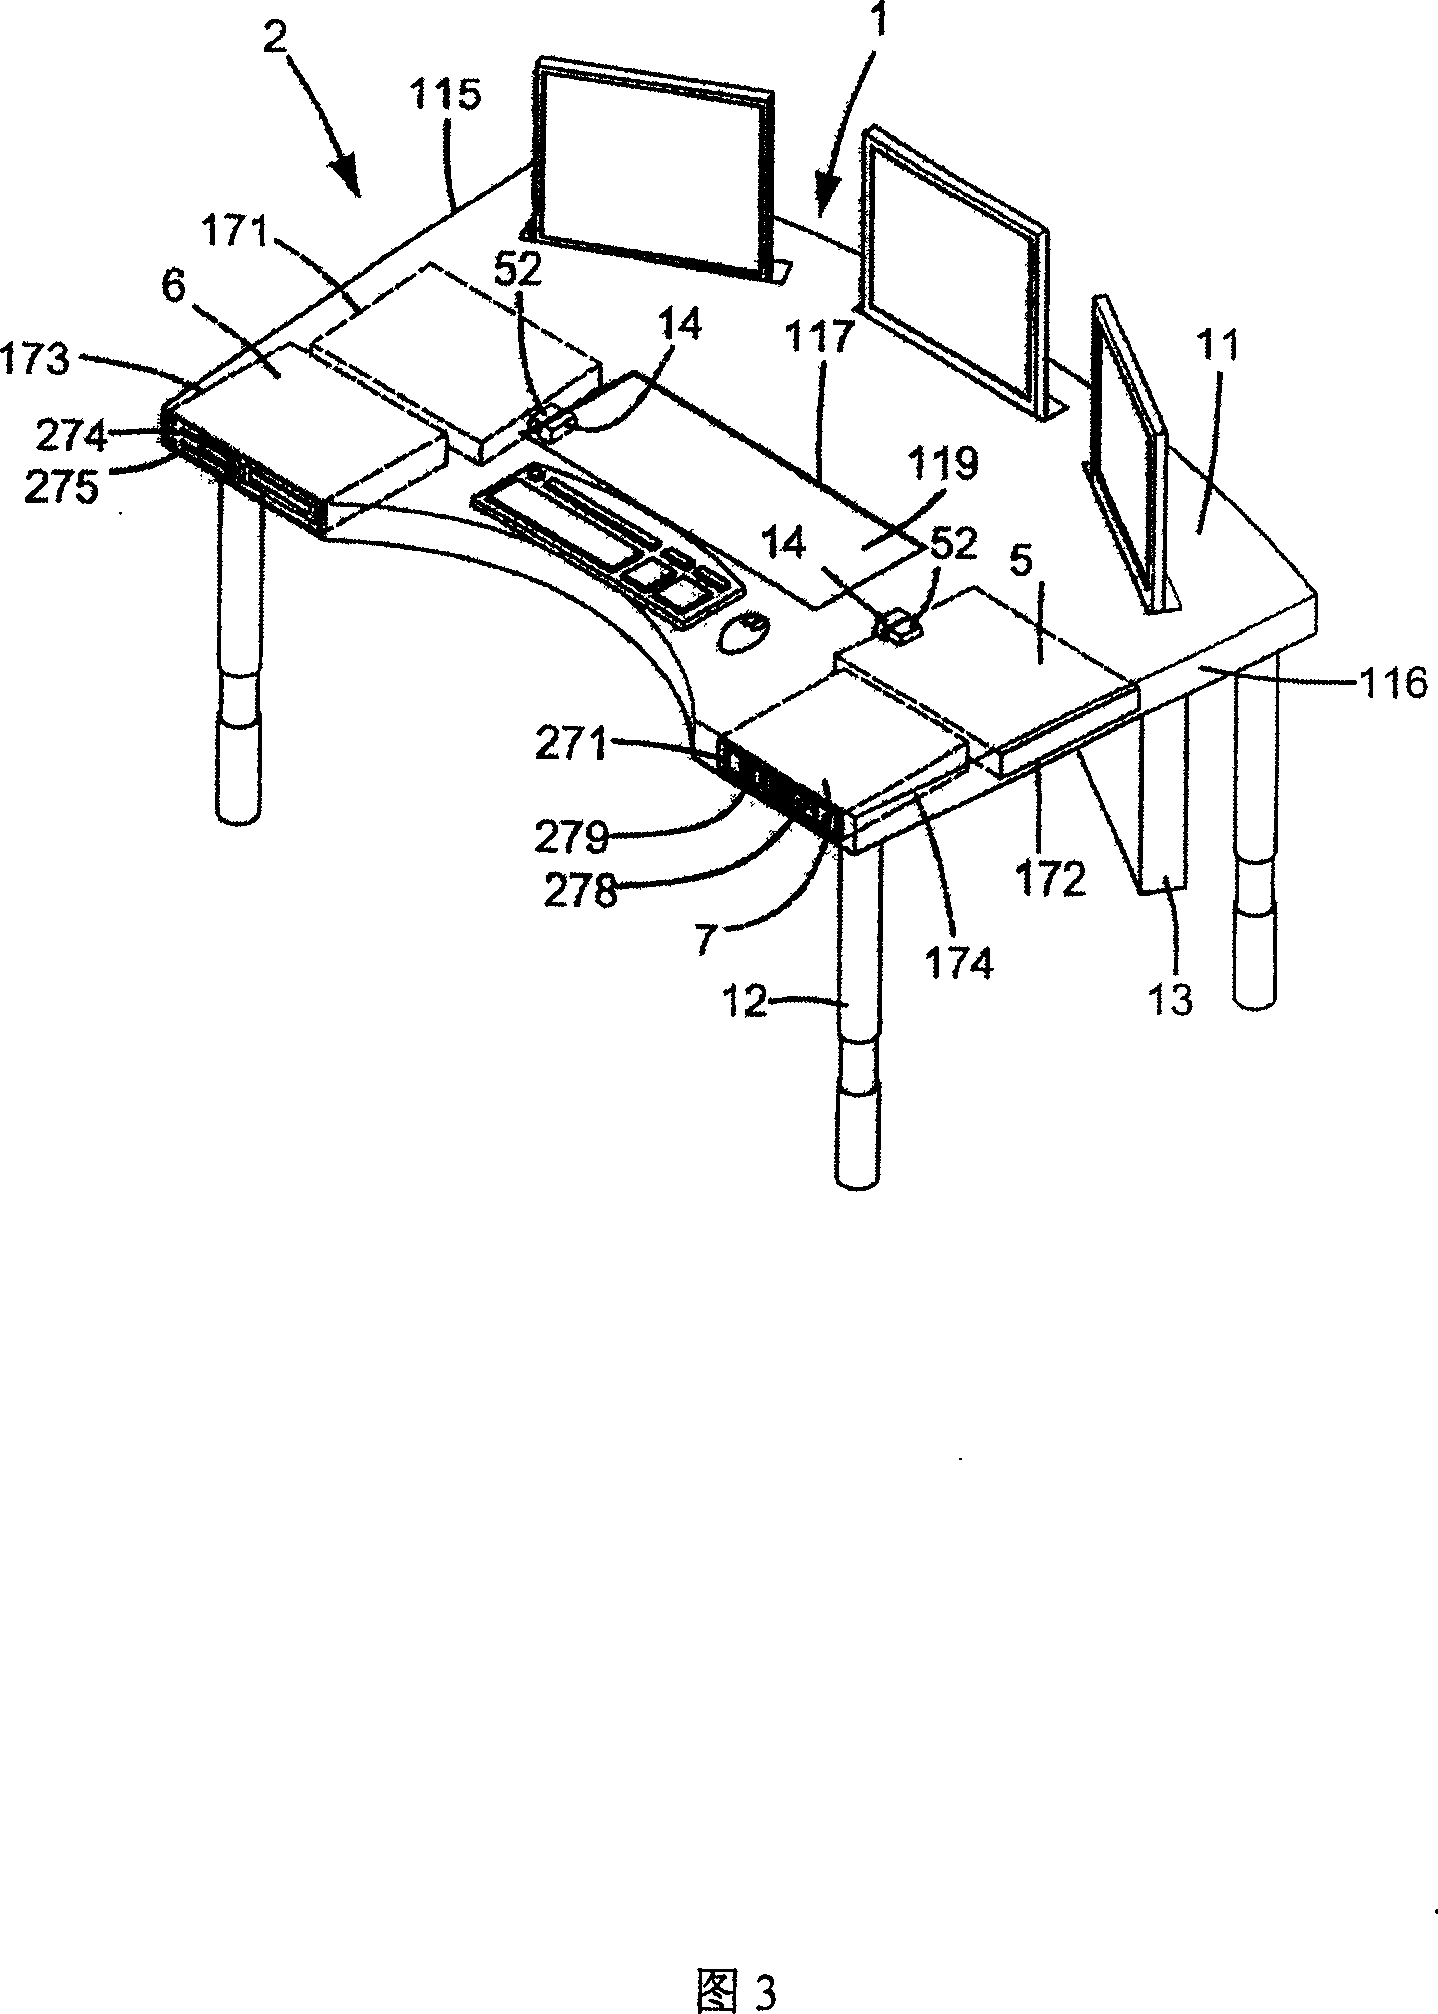 Operating table with built-in computer apparatus